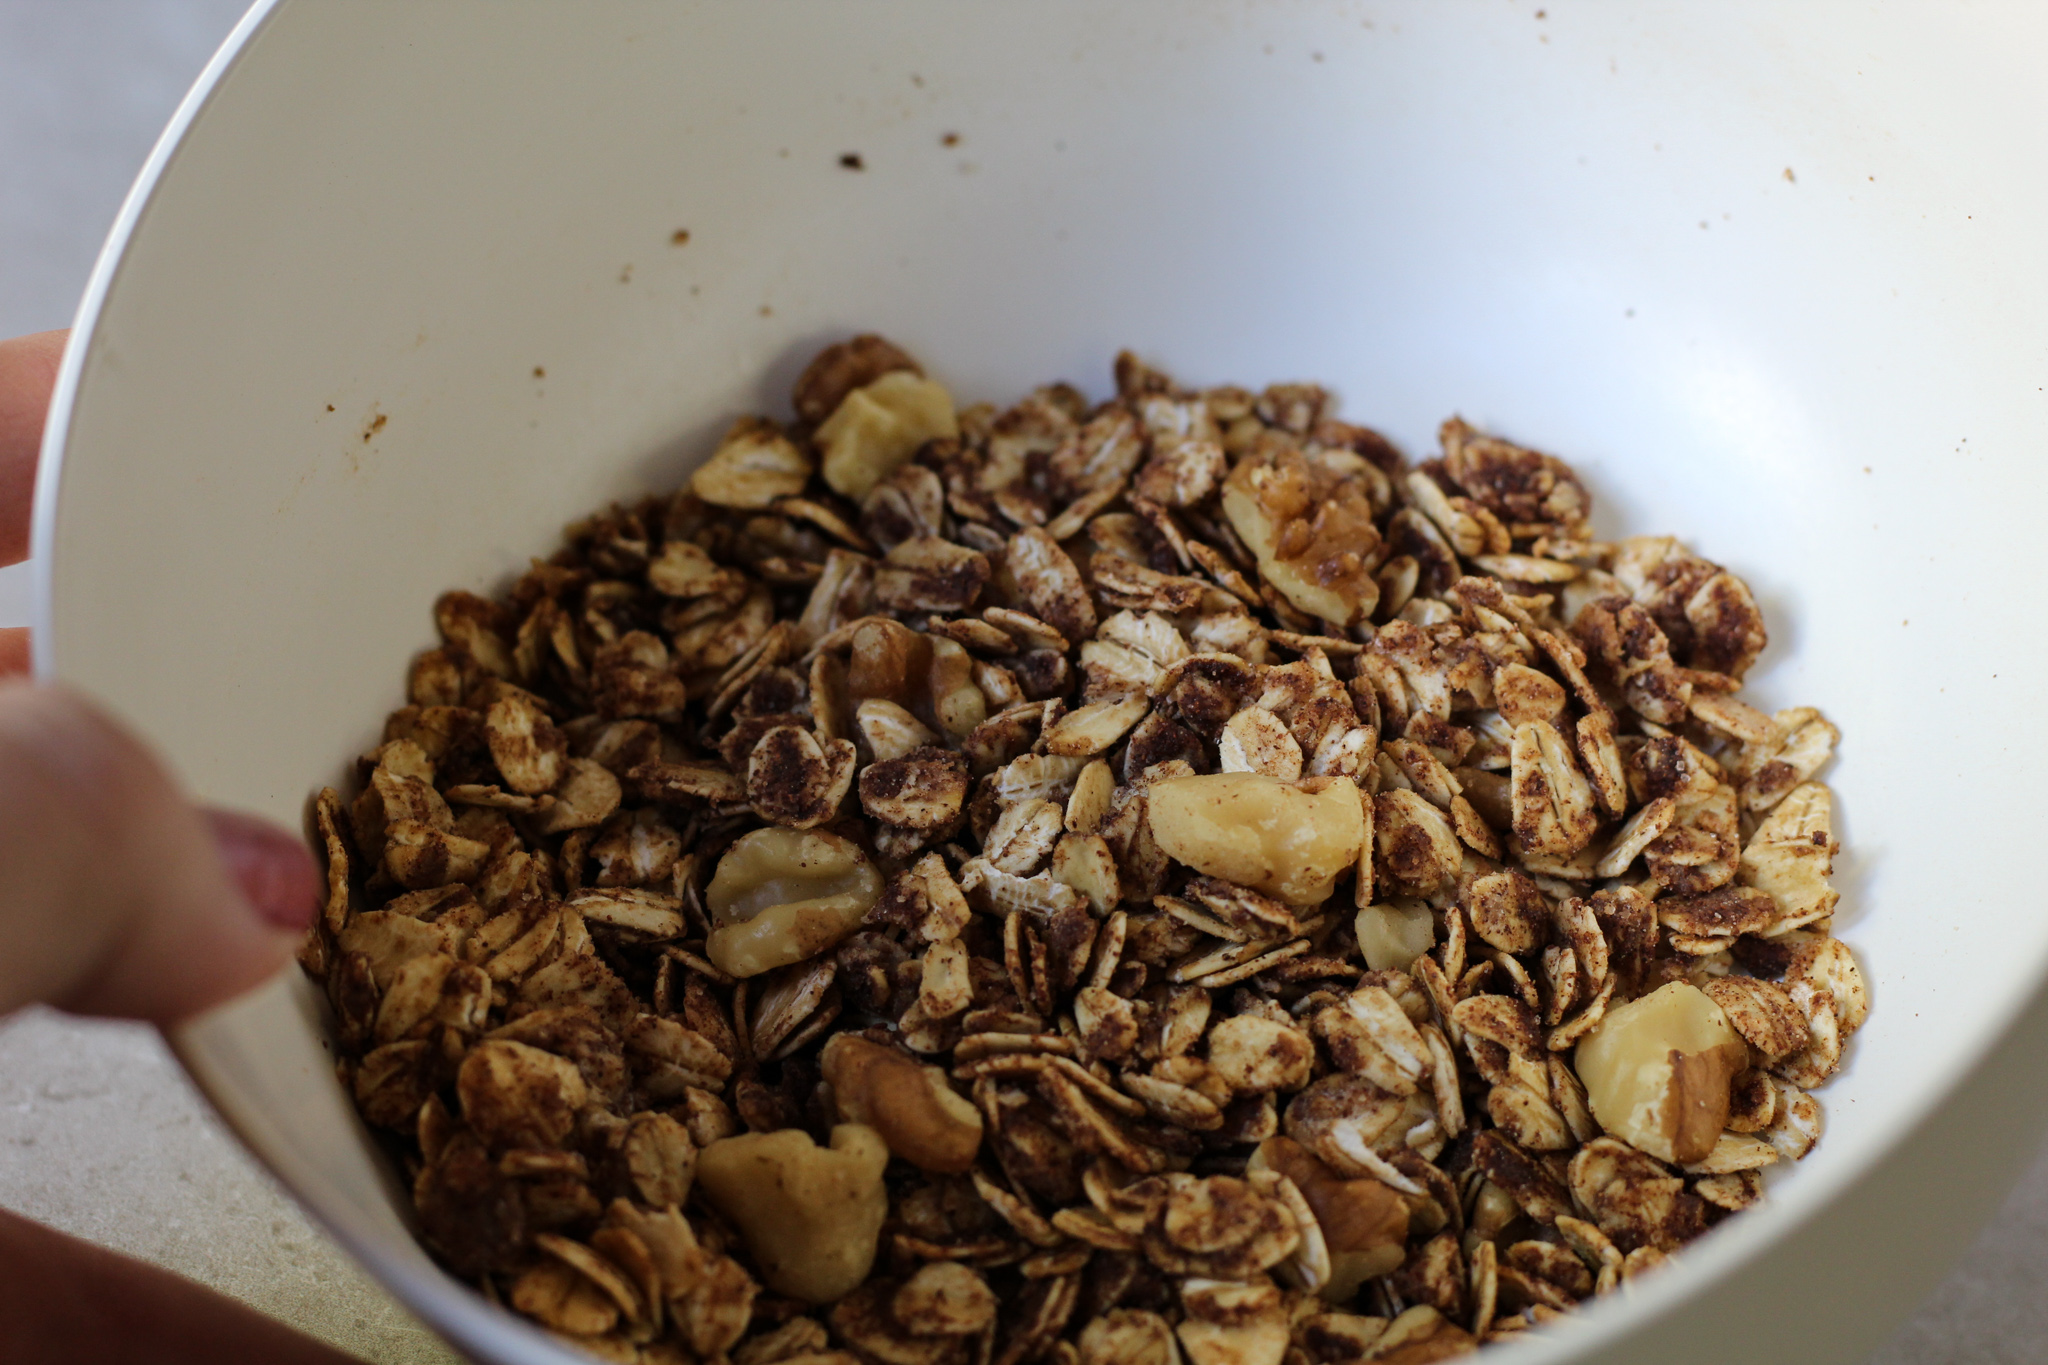 Mixture of cinnamon, oats, and walnuts in a bowl